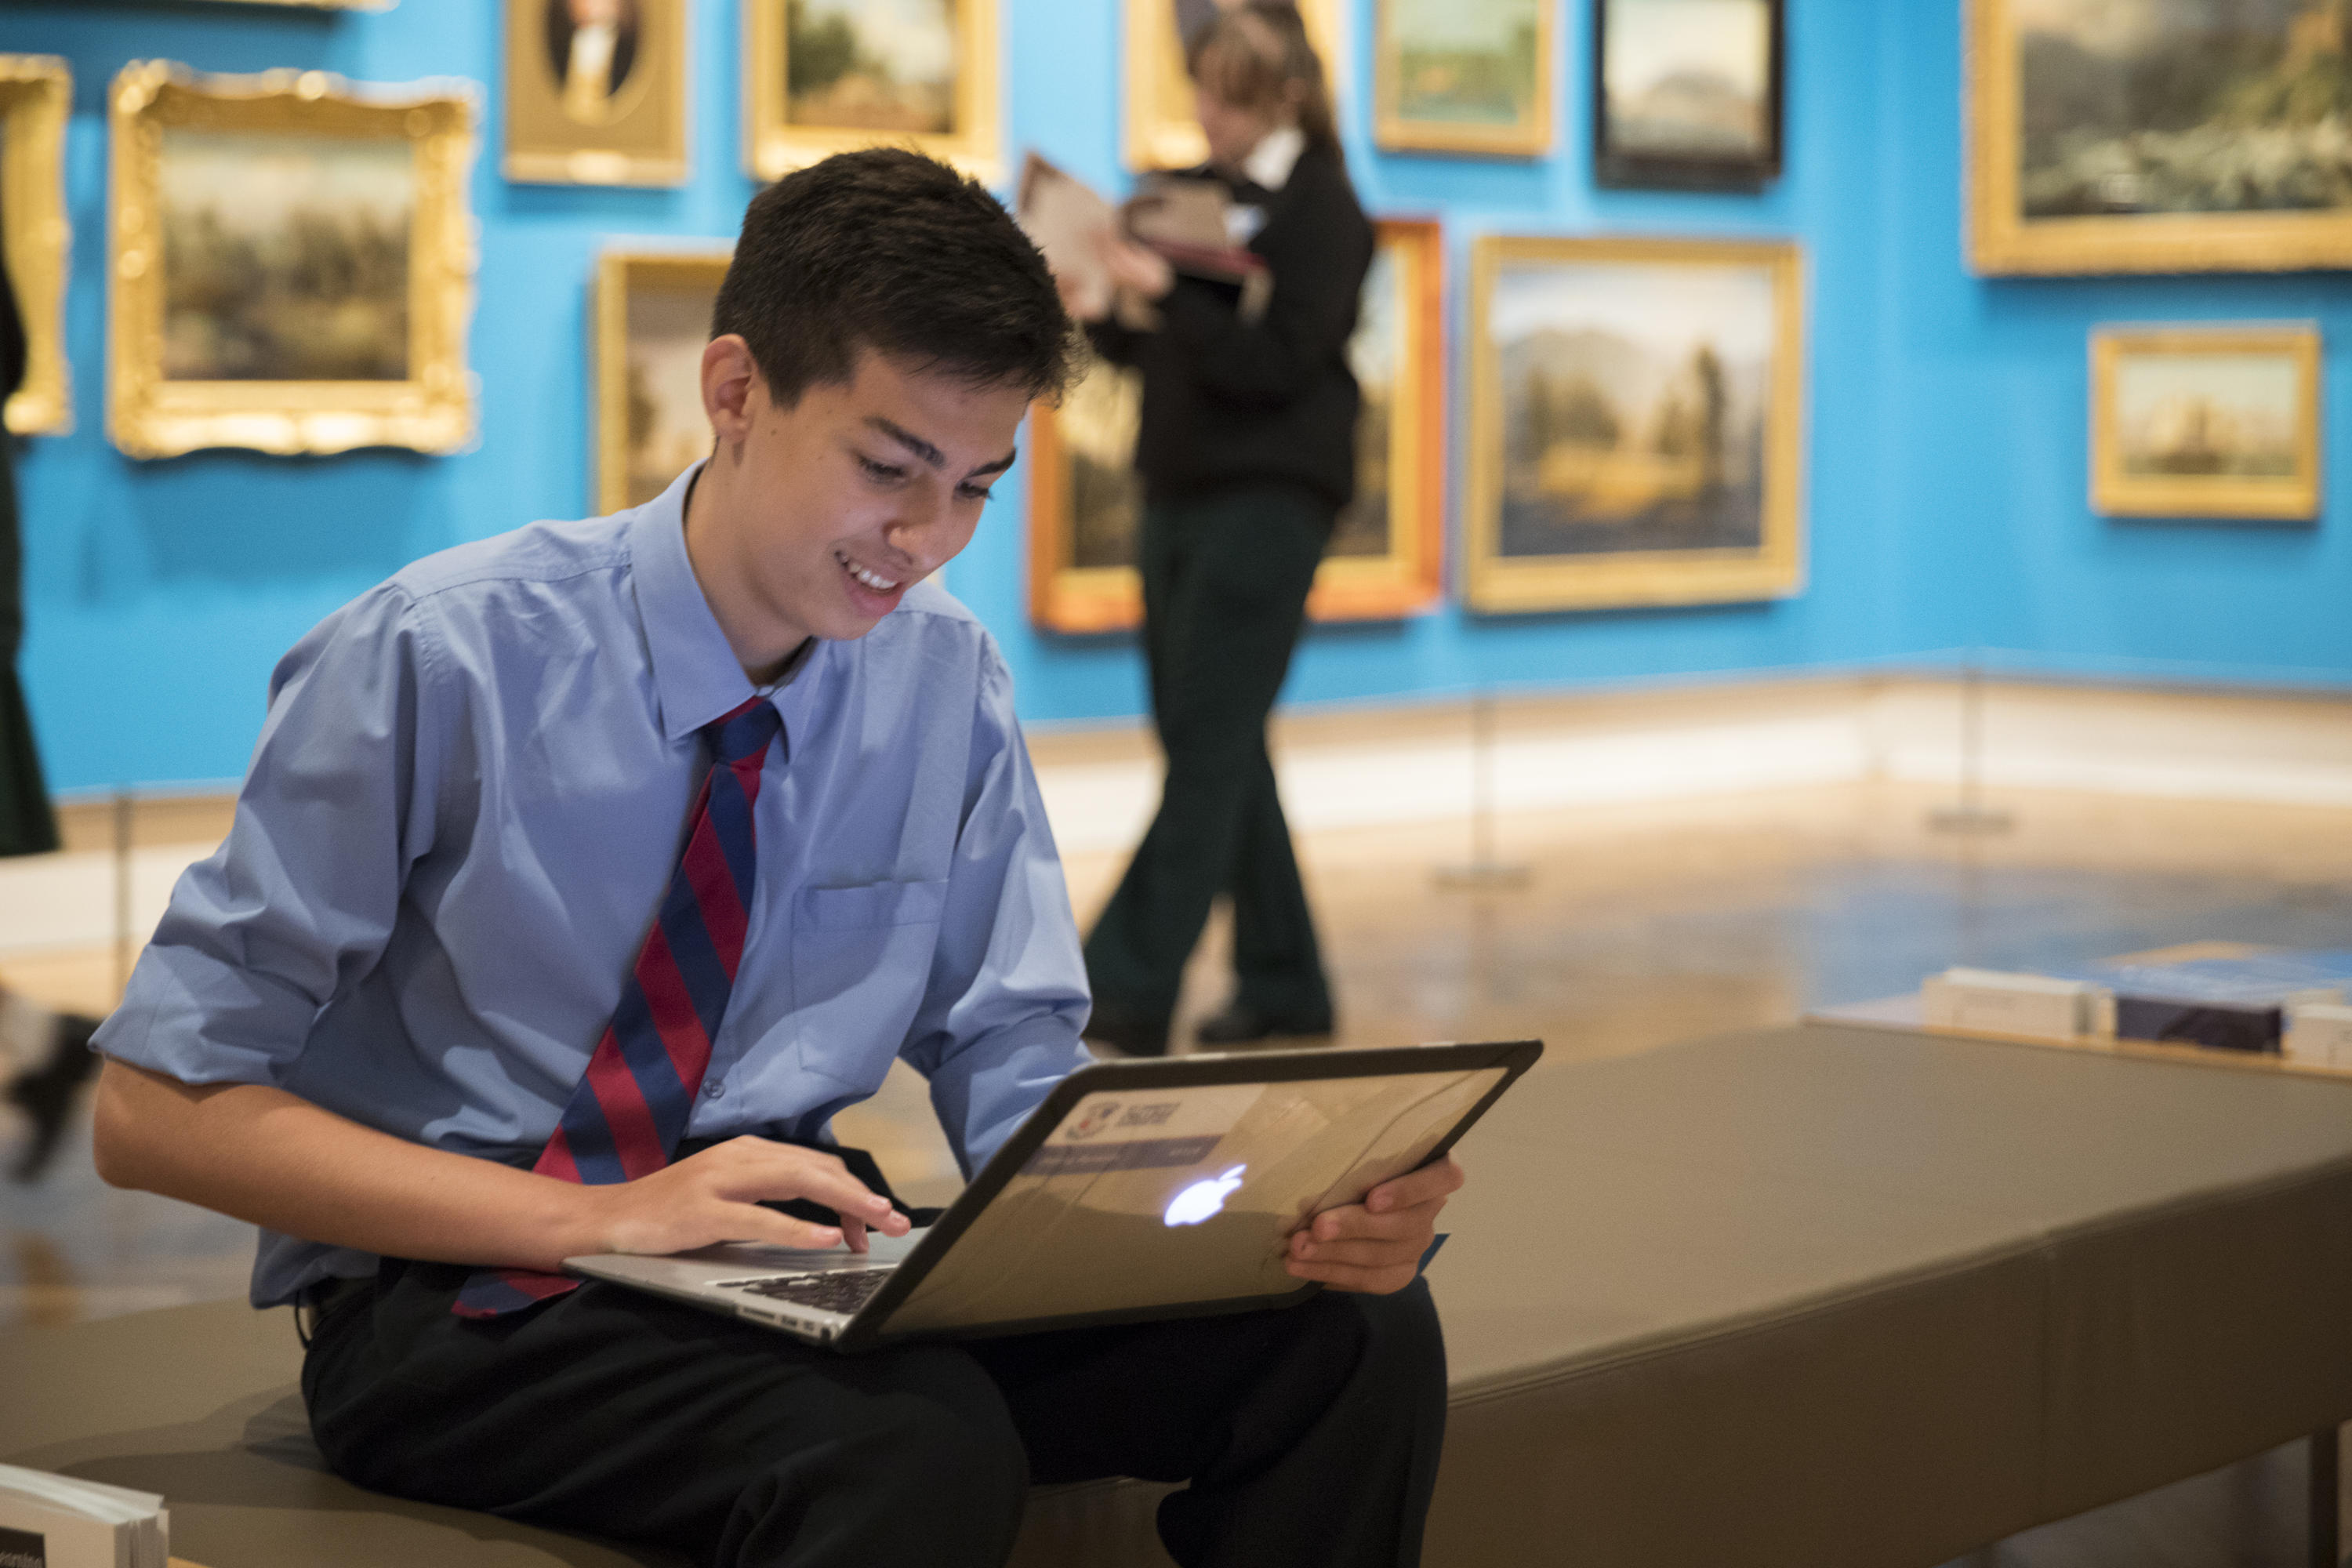 A student on his laptop in the Paintings from the Collection gallery